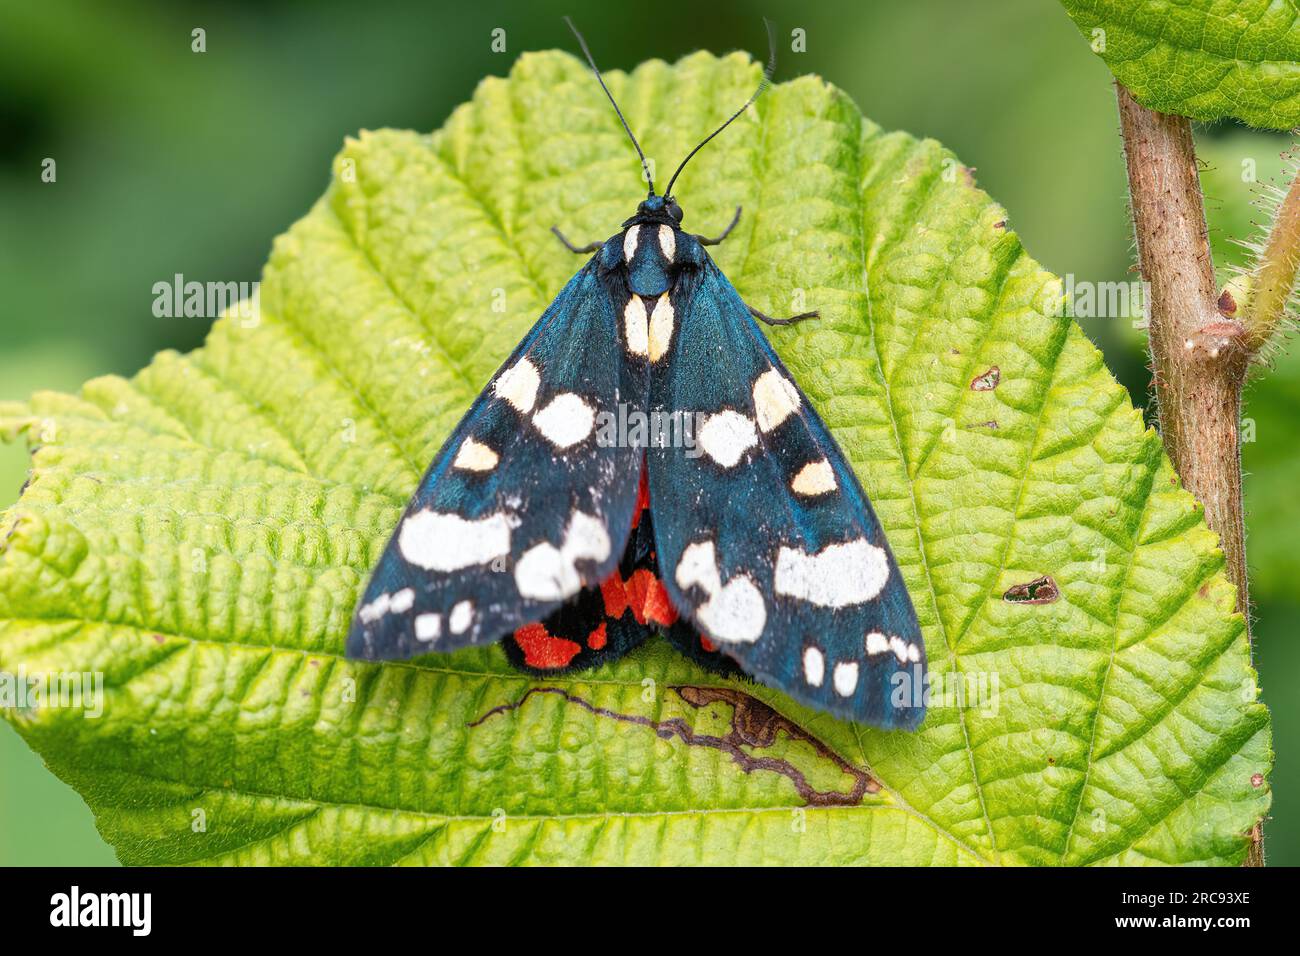 Scarlet tiger moth (Callimorpha dominula) resting on a leaf partially showing the bright red hindwings, Hampshire, England, UK Stock Photo